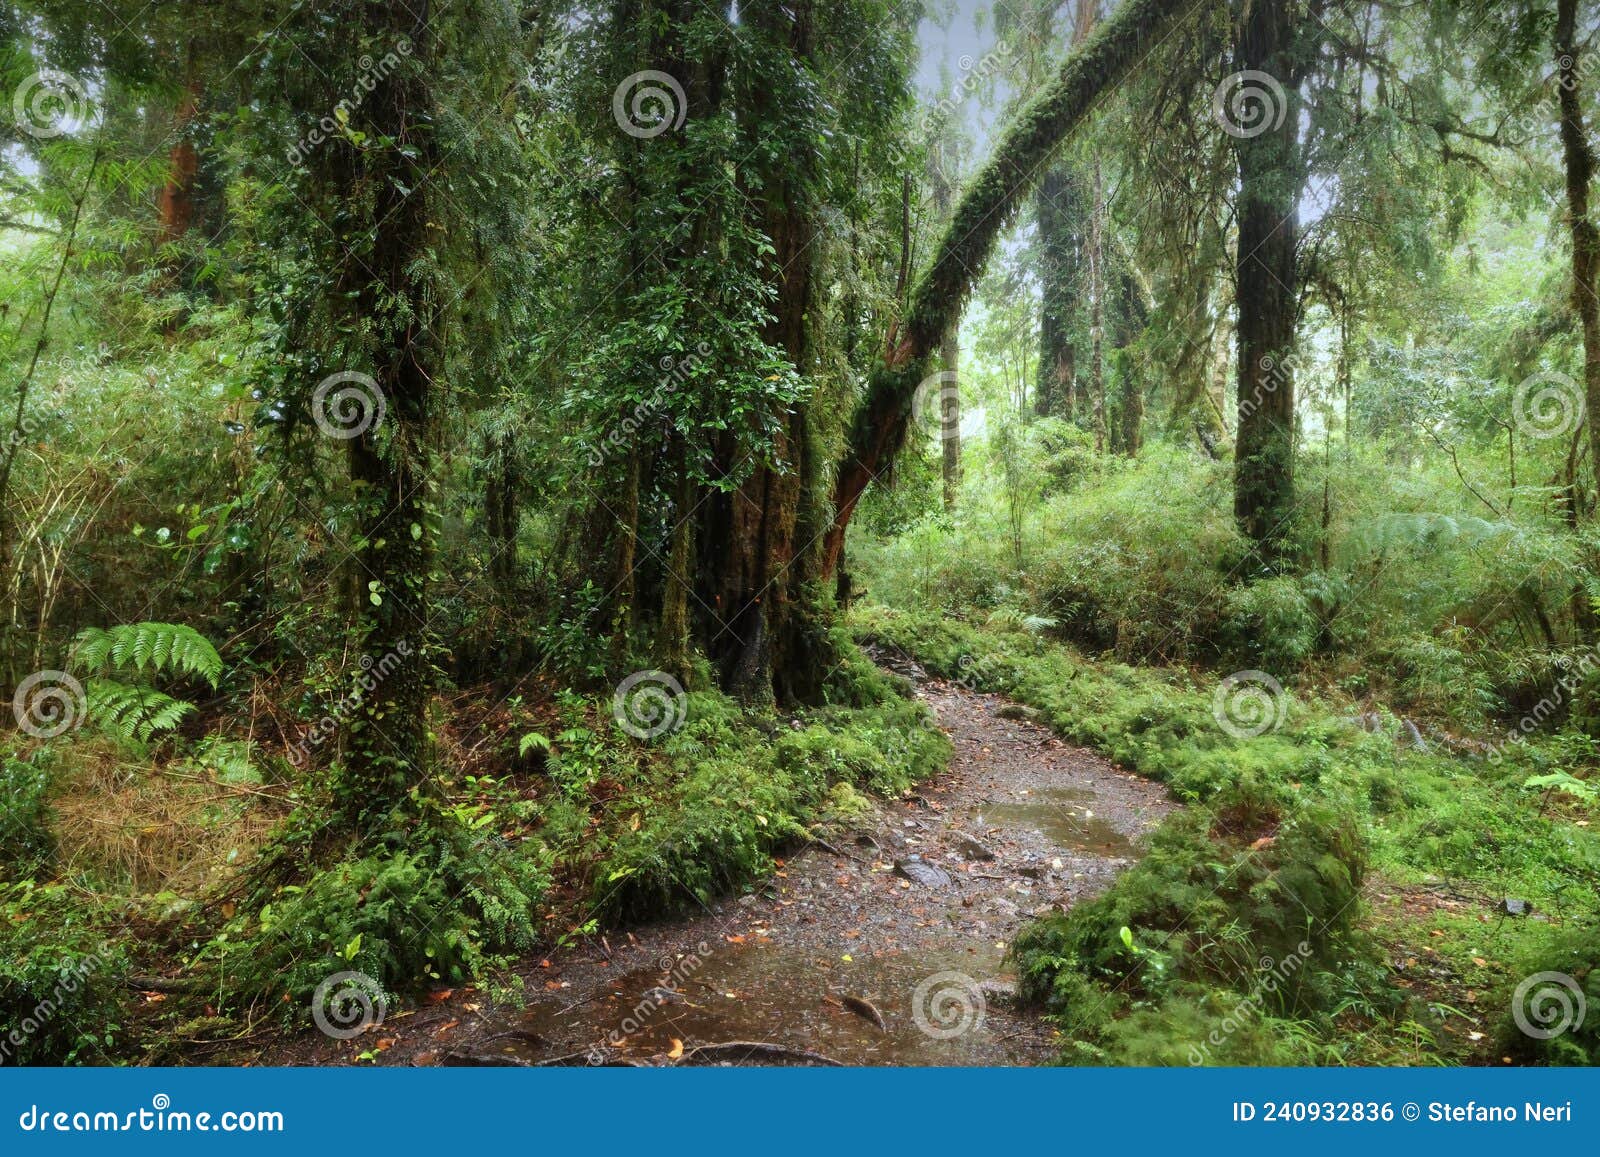 the forest of the alerce andino national park, chile